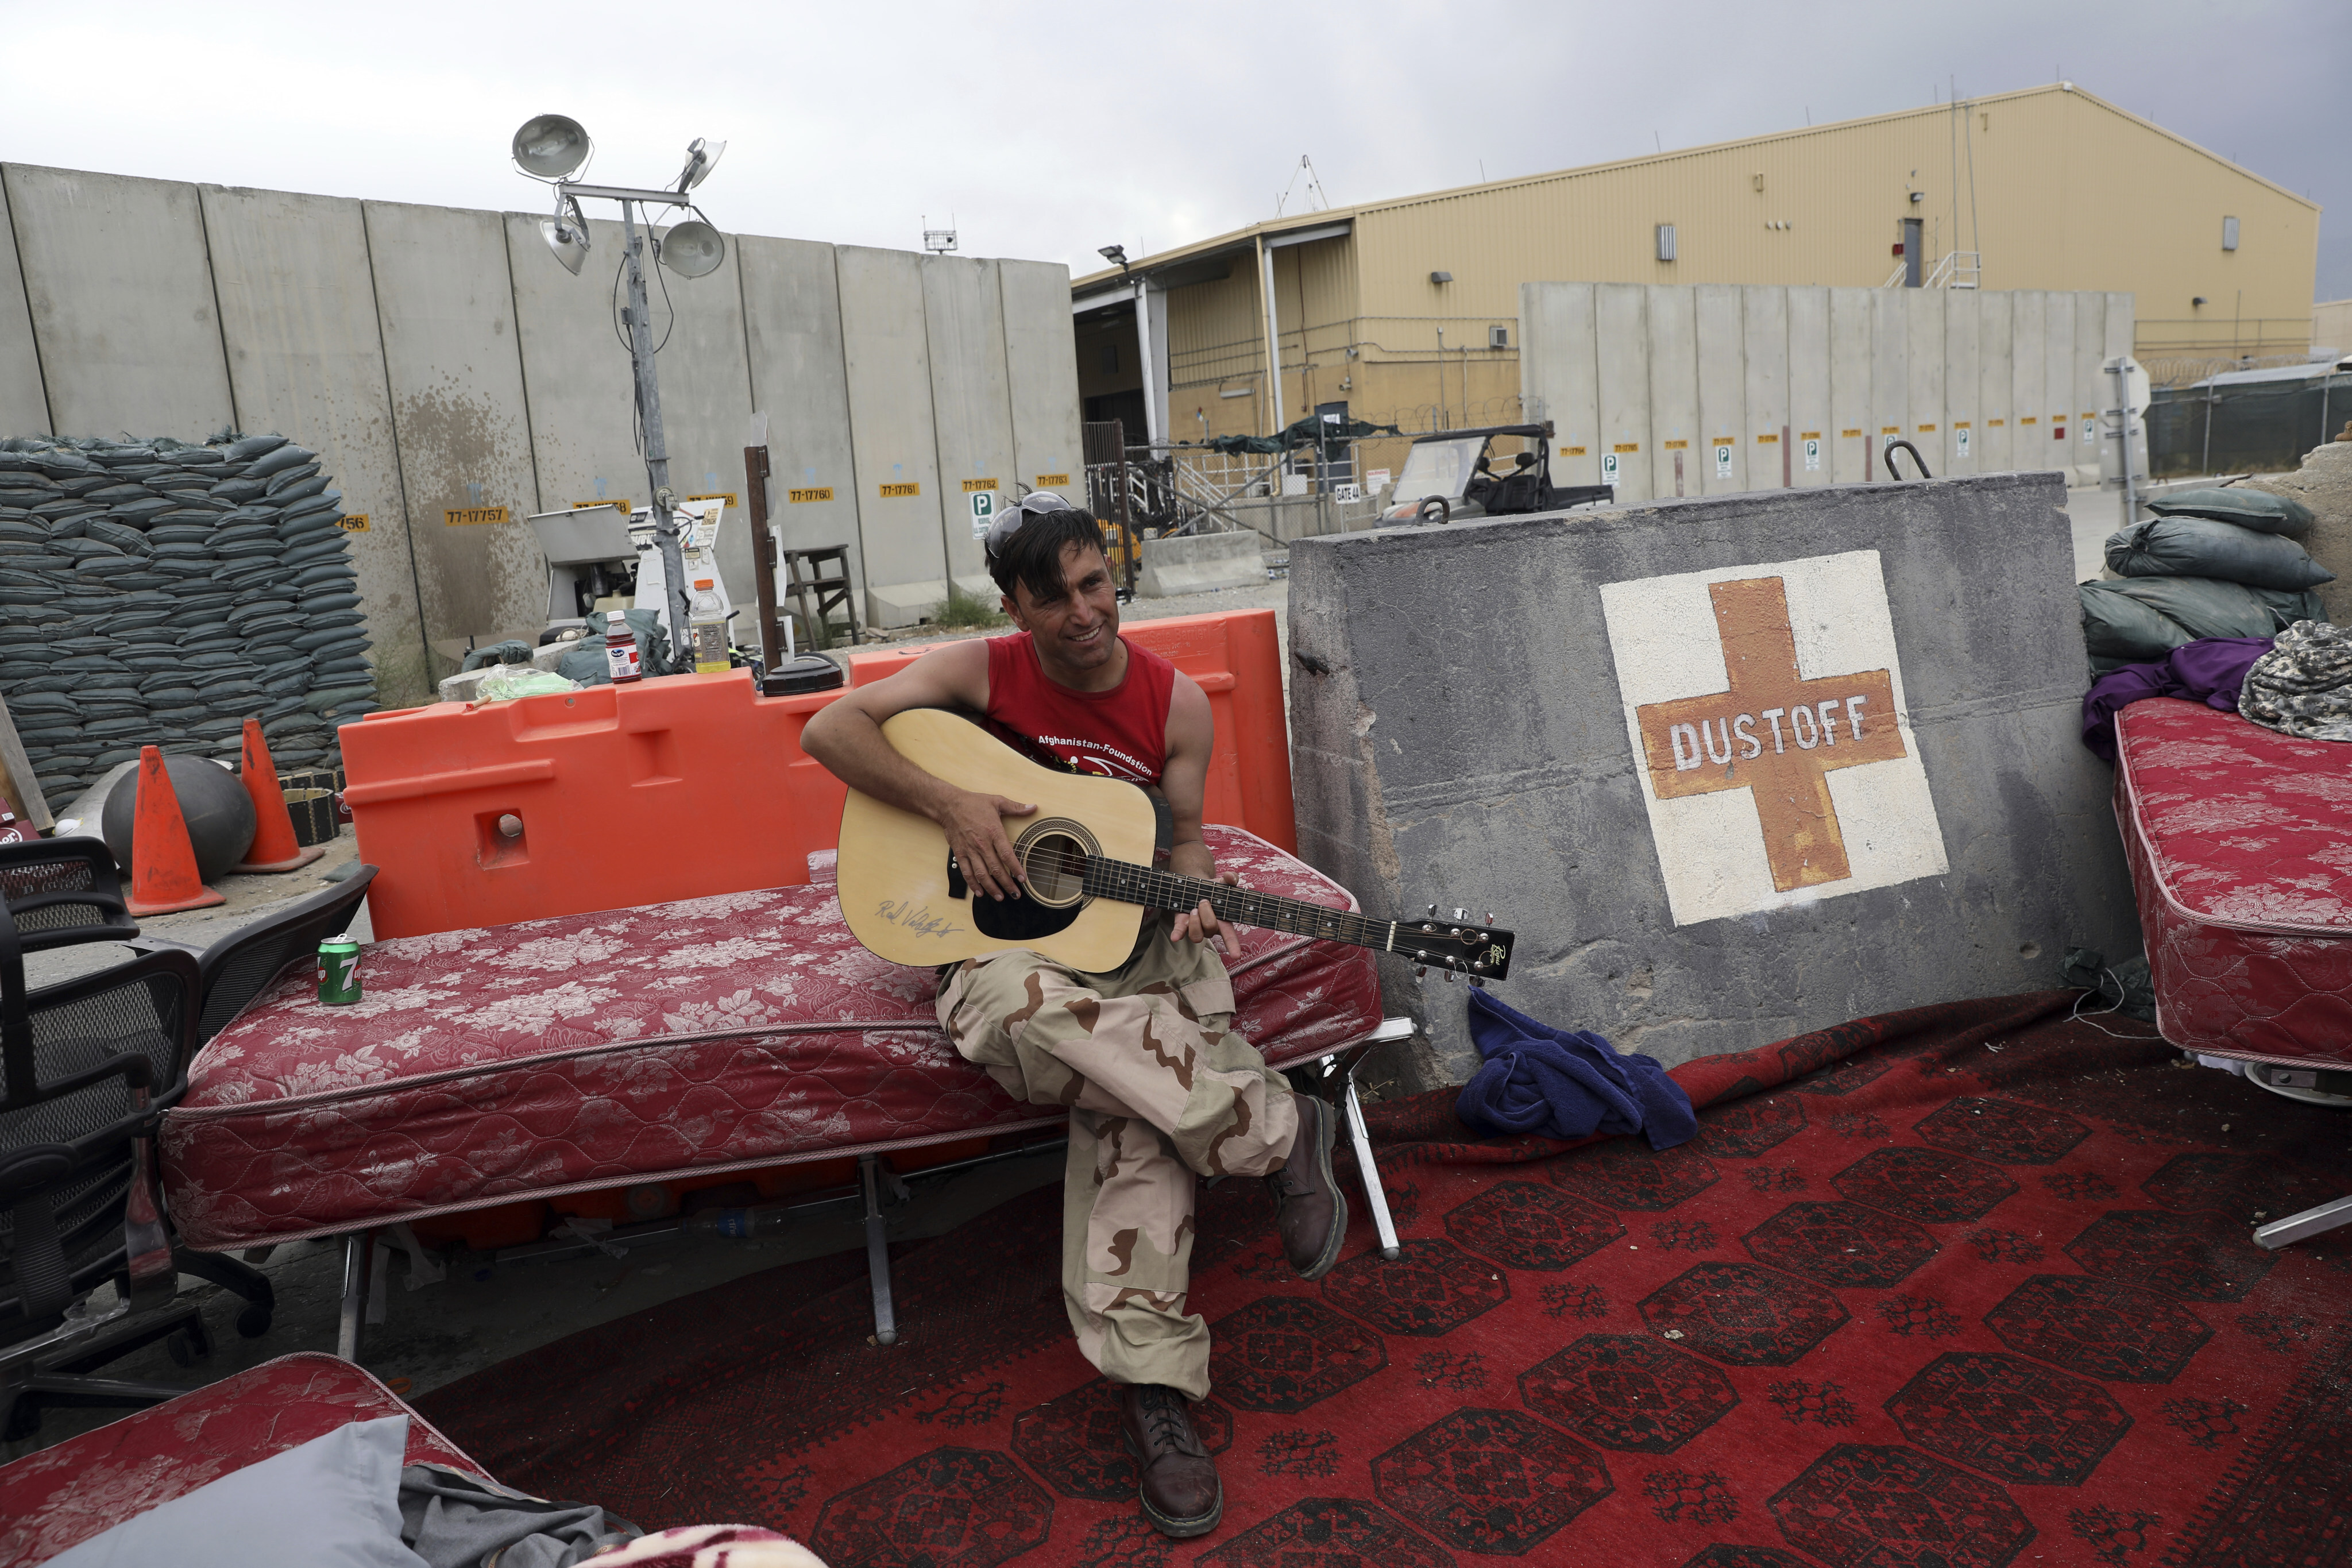 An Afghan soldier plays a guitar that was left behind after the American military departed Bagram air base in Afghanistan on July 5. Photo: AP